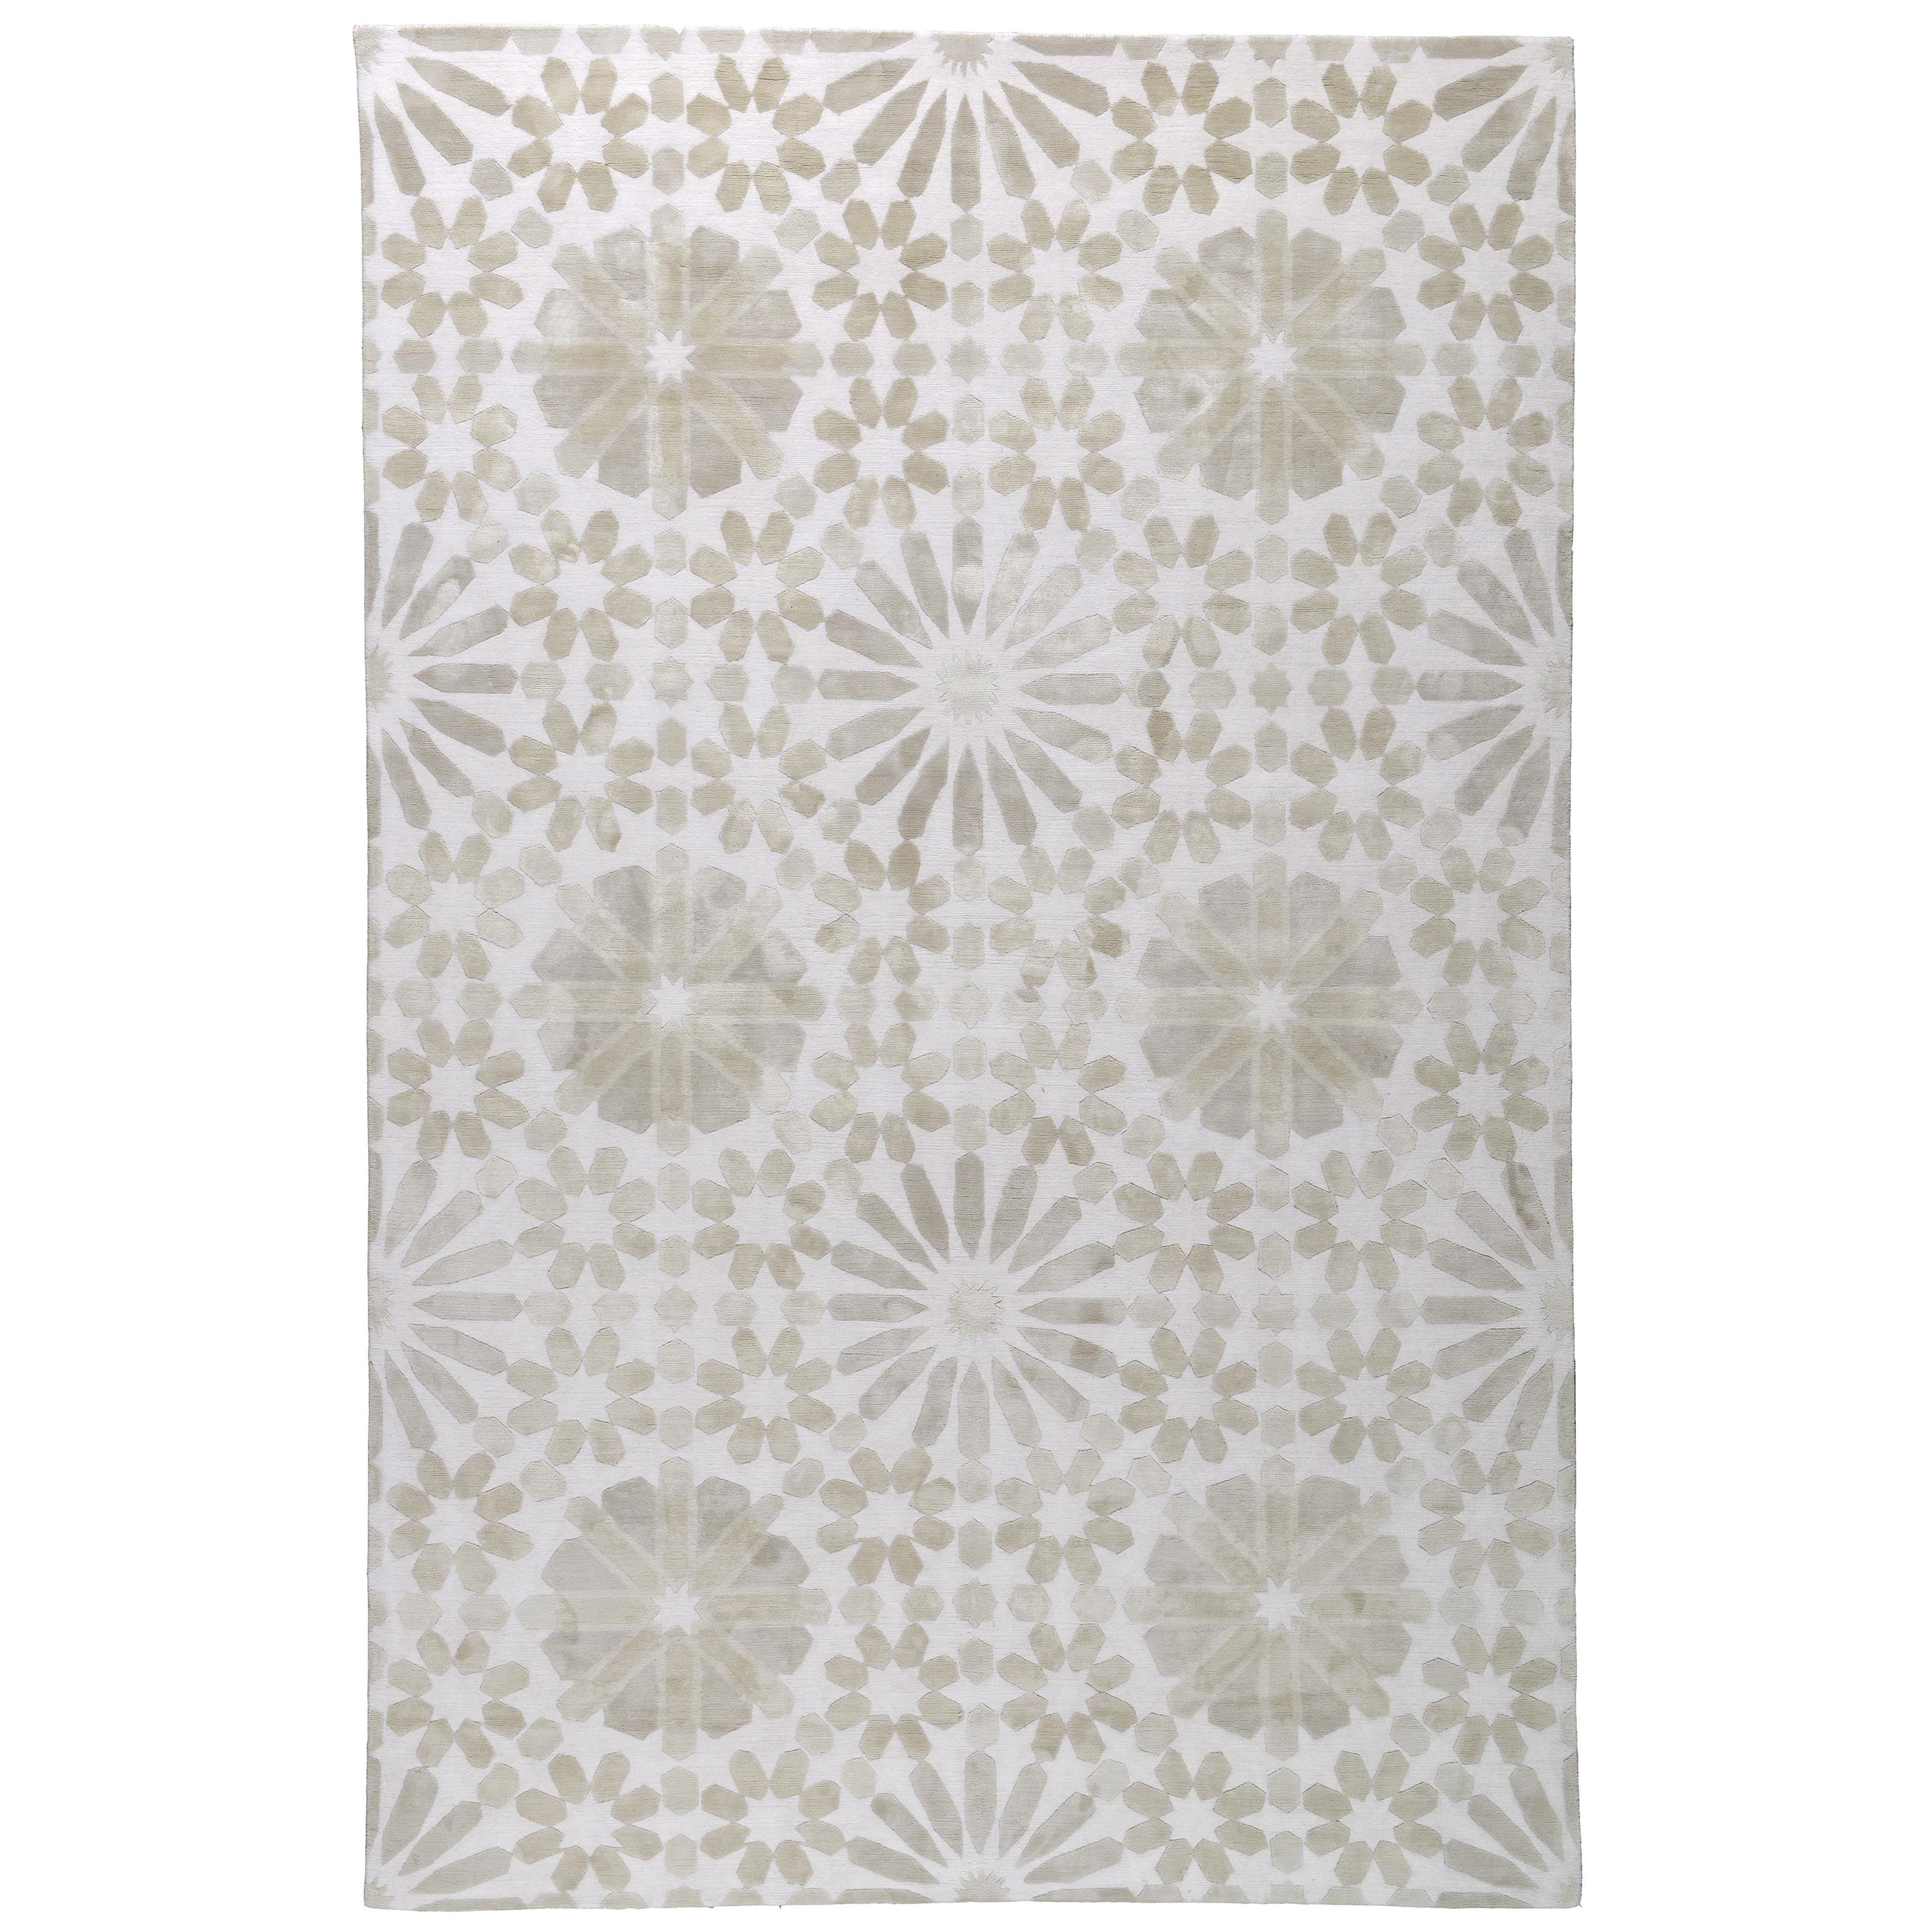 Marrakech Hand-Knotted 10x8 Rug in Wool and Silk by Martyn Lawrence Bullard